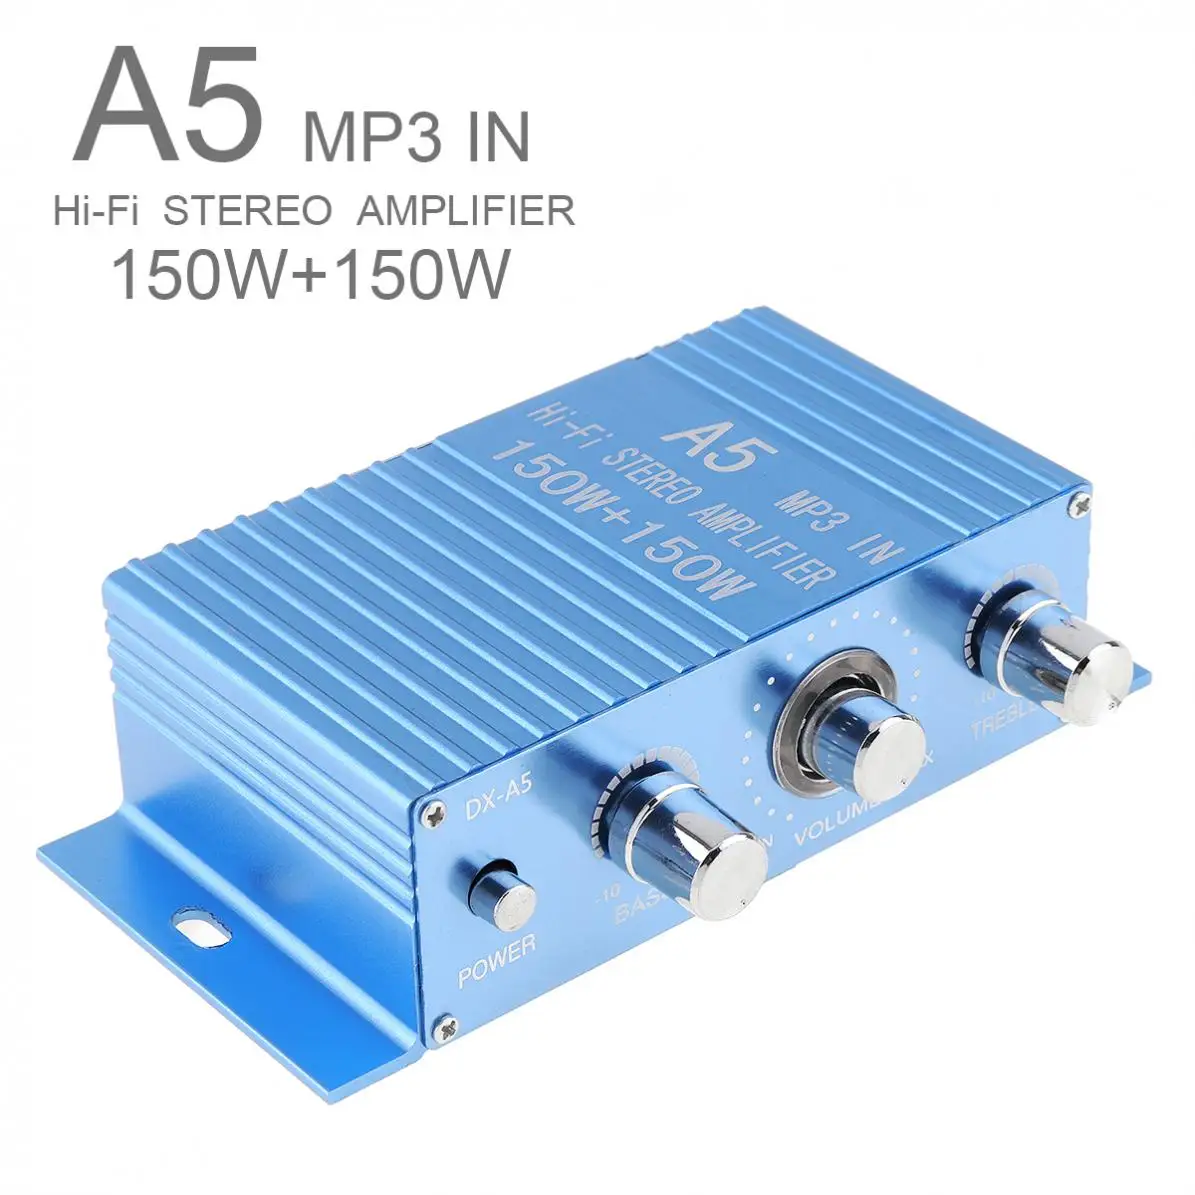 A15 DC12V 2.0 Two Channel MP3 in Hi-Fi Stereo Amplifier 150W + 150W with 3.5AUX Interface for Car / MP3 / PC / CD / Speakers